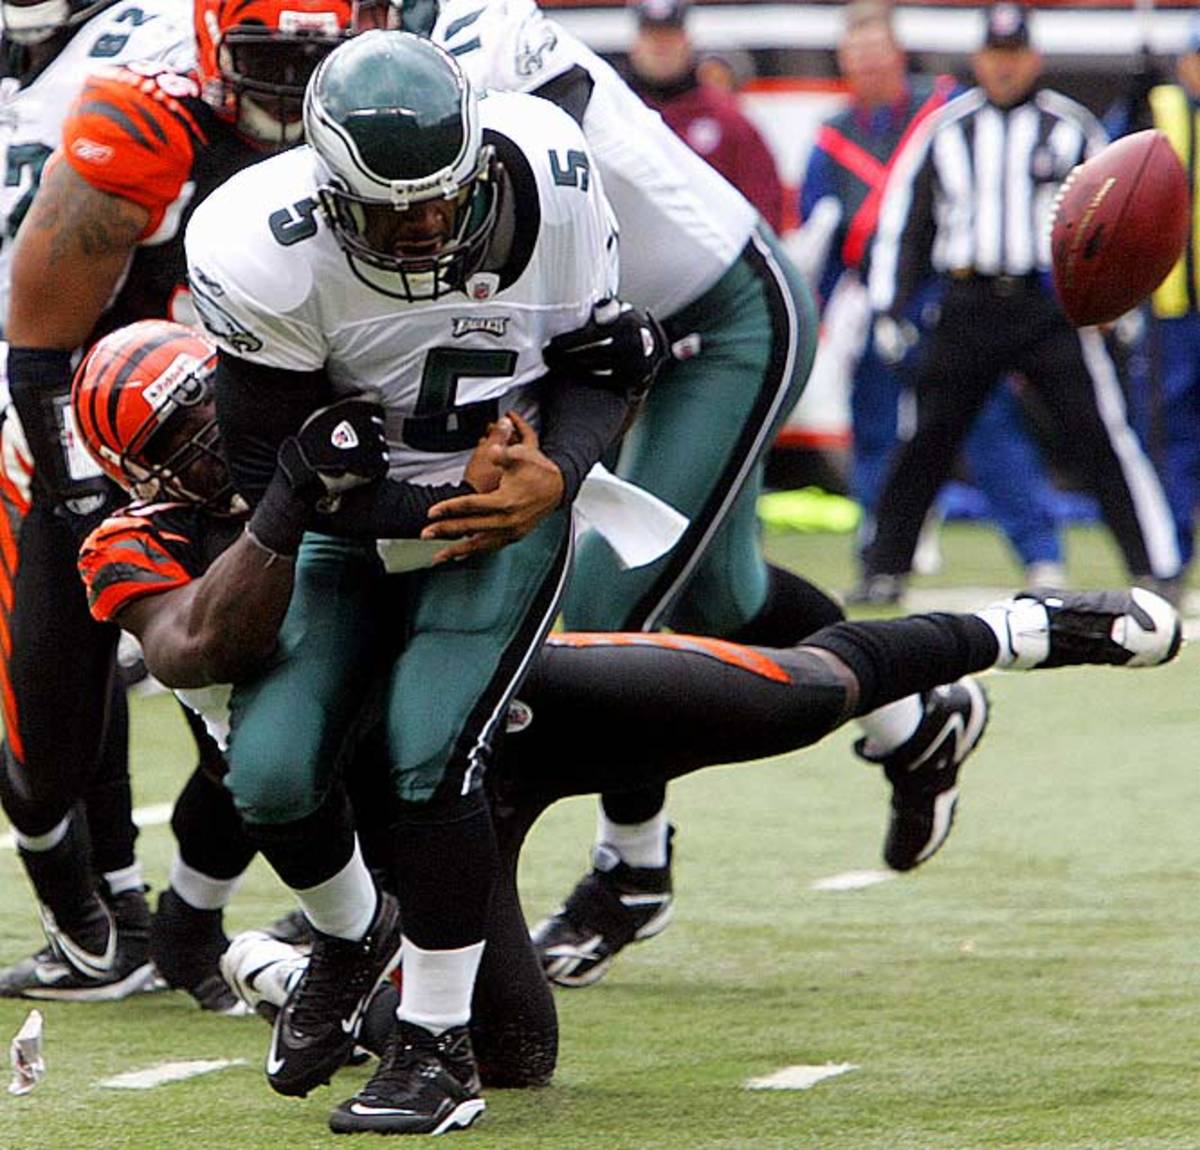 Donovan McNabb and the Eagles tie the Bengals 13-13